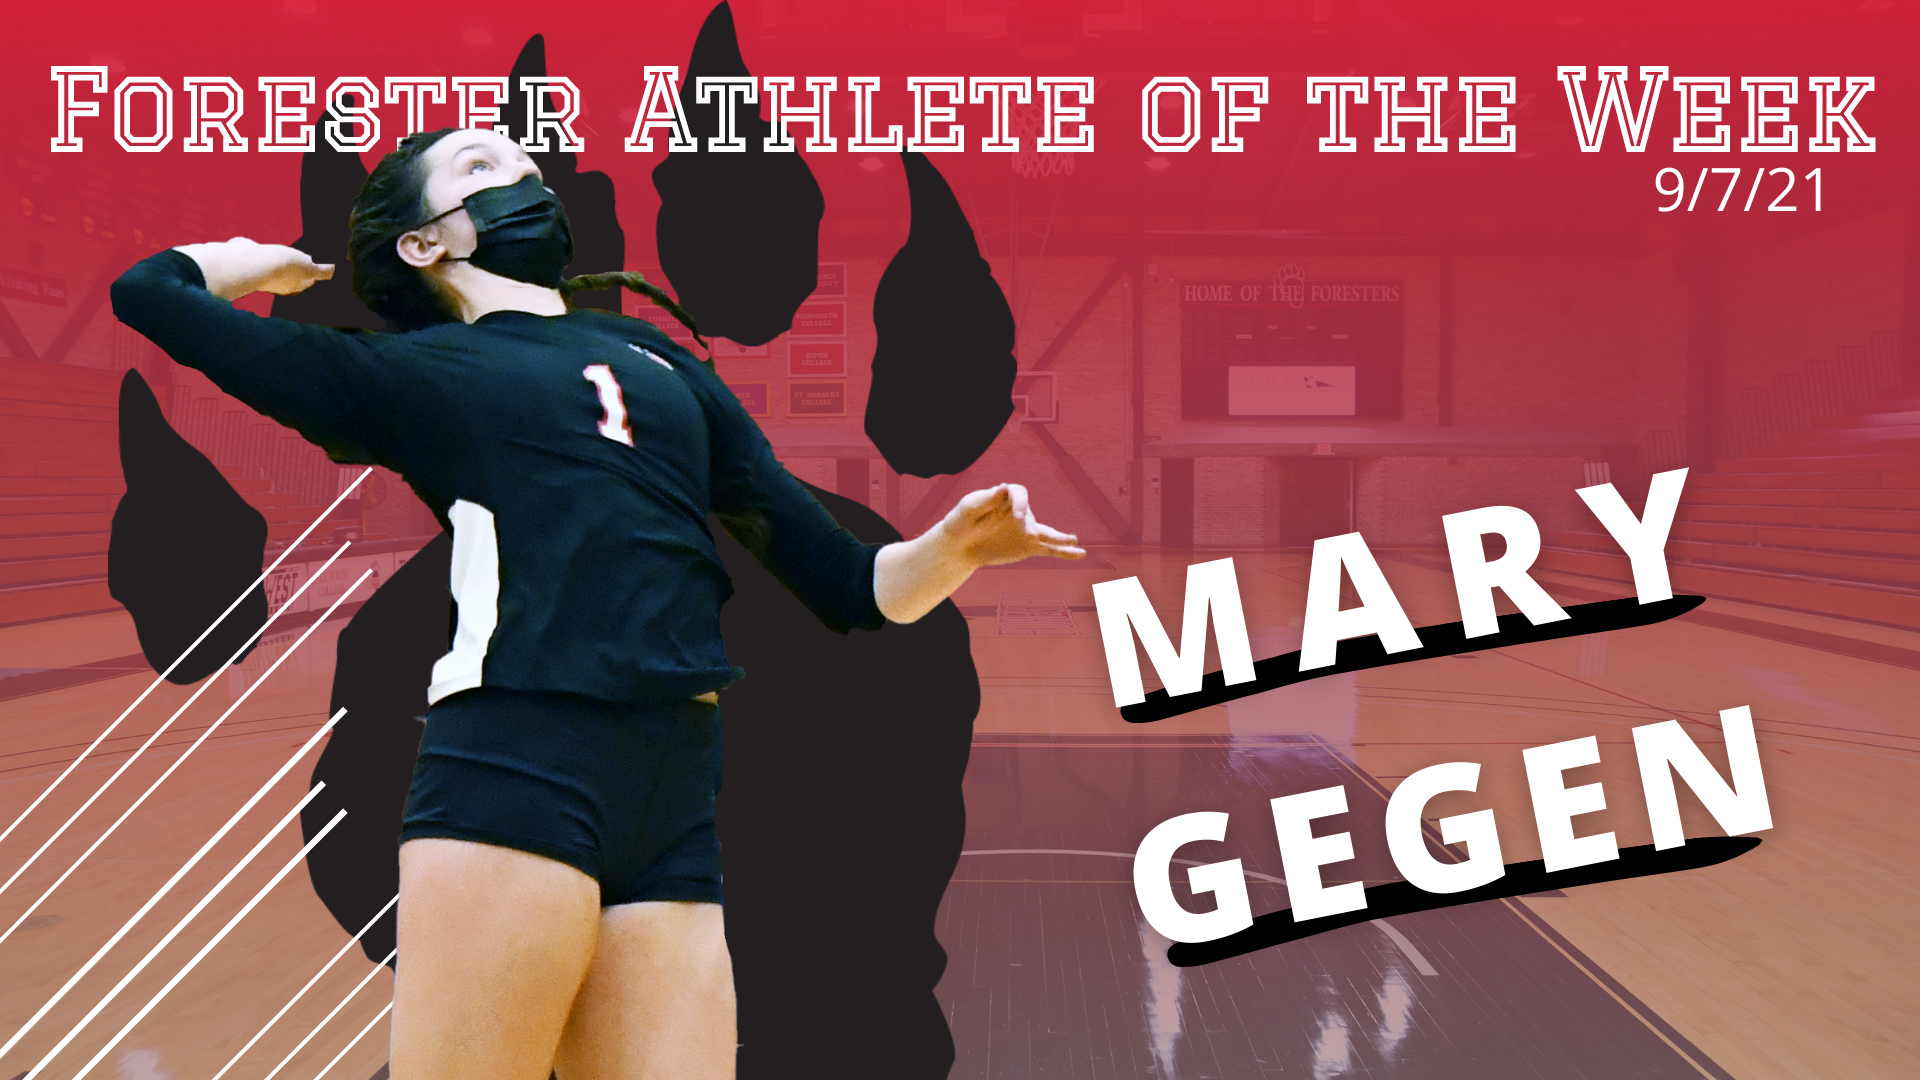 Mary Gegen Named Women's Forester Athlete of the Week